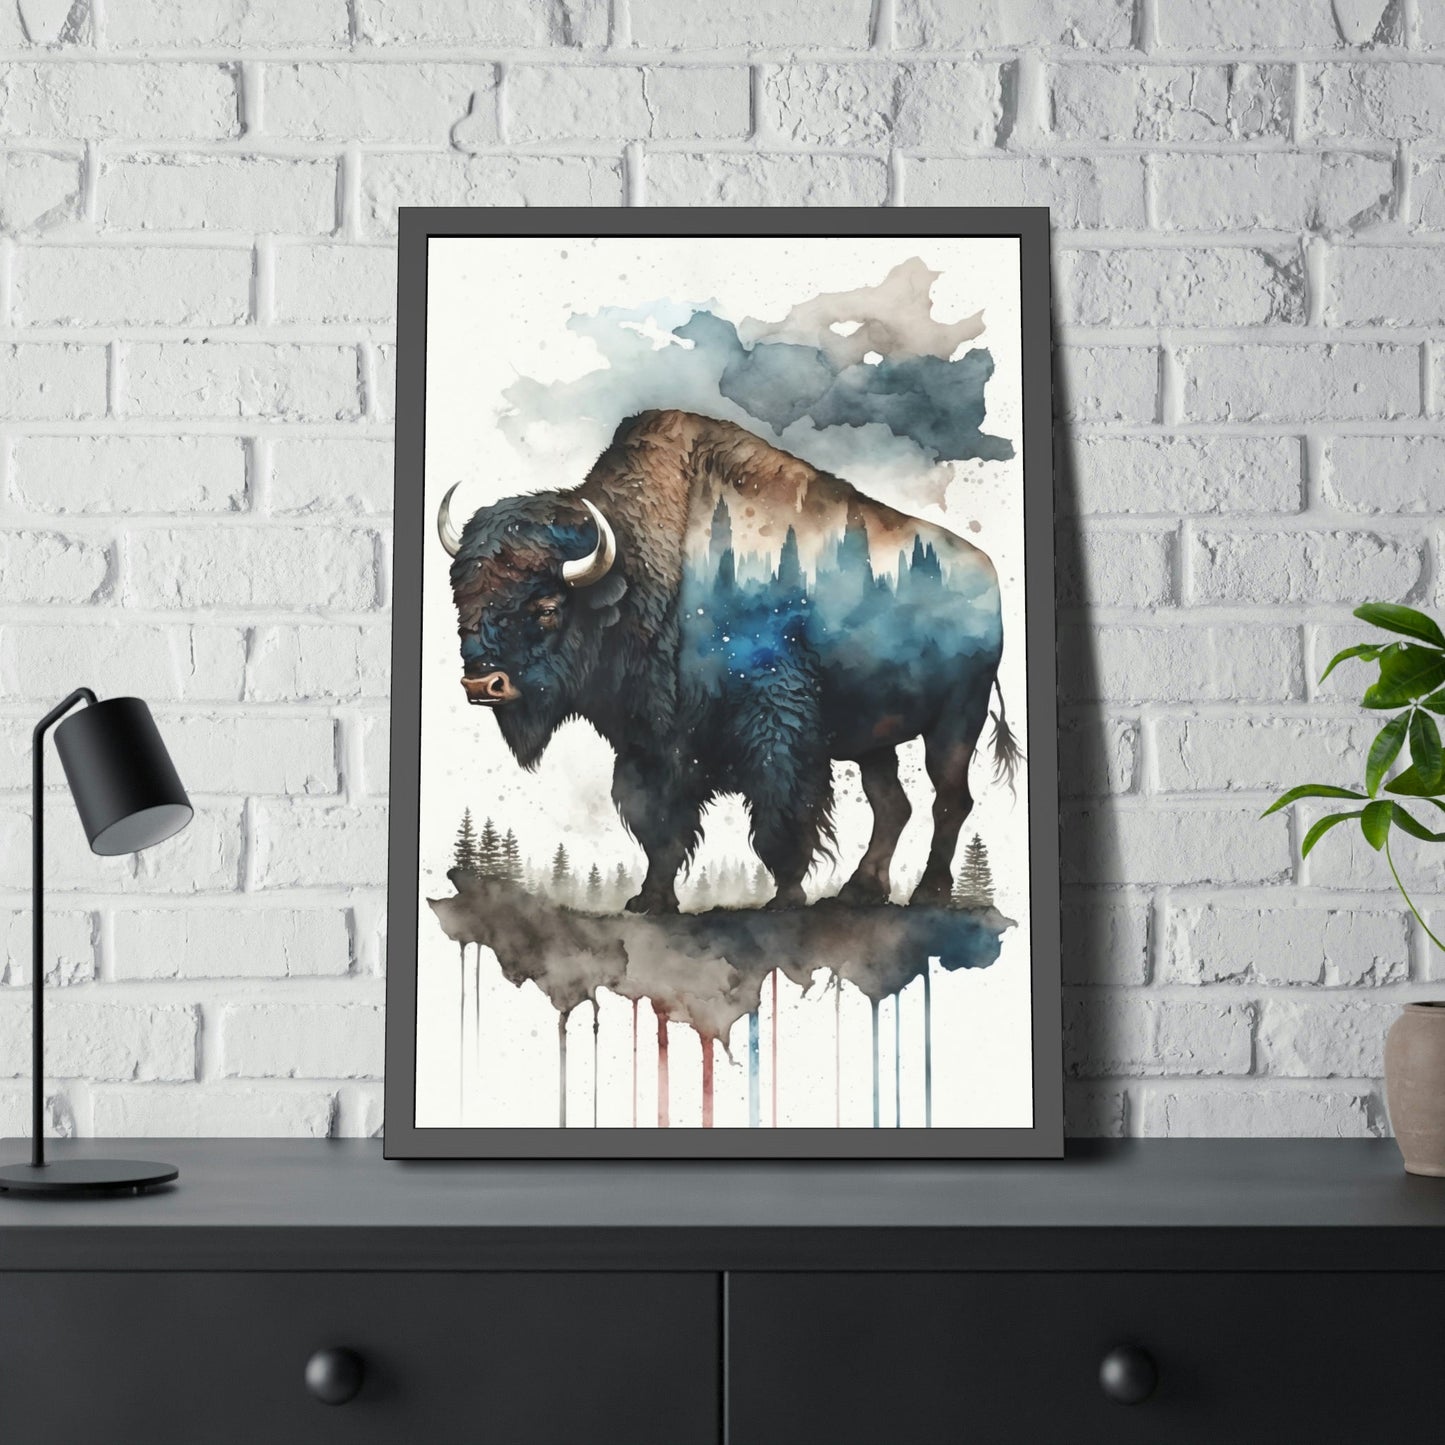 A Lone Buffalo in the Wild: An Inspiring Artwork on Canvas & Poster